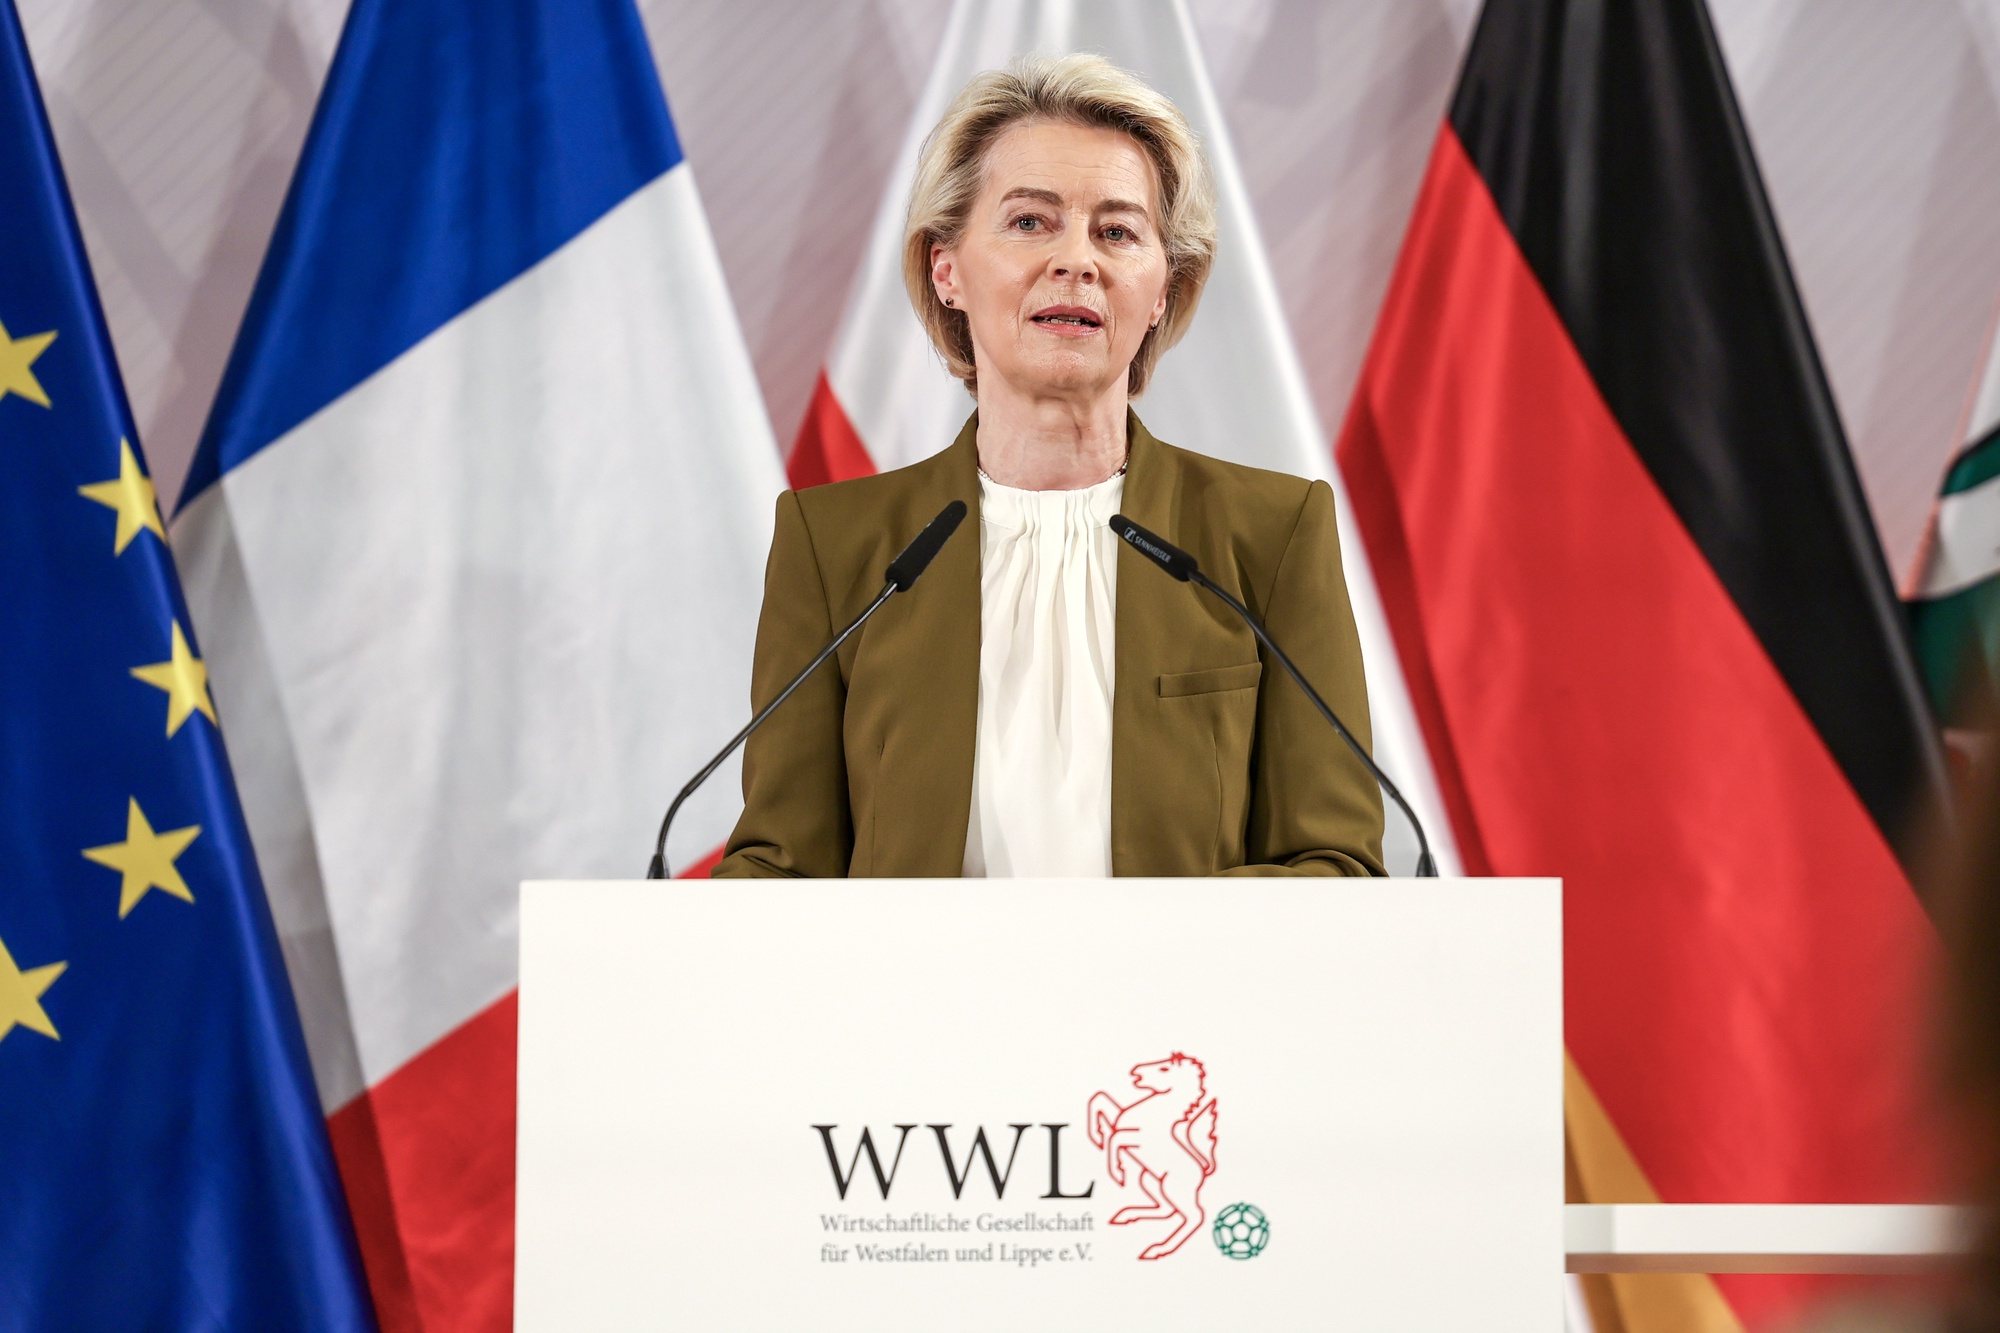 epa11374765 European Commission President Ursula von der Leyen delivers a speech during the awarding ceremony of the International Prize of the Peace of Westphalia in Muenster, Germany, 28 May 2024. Macron, who is on a visit to Germany from 26 to 28 May, will be awarded the International Peace of Westphalia Prize in Muenster on 28 May. The French President and Federal President Steinmeier will visit several regions of Germany together. It is the first state visit - the highest form of visit in diplomatic protocol - by a French president to Germany in 24 years.  EPA/CHRISTOPHER NEUNDORF / POOL